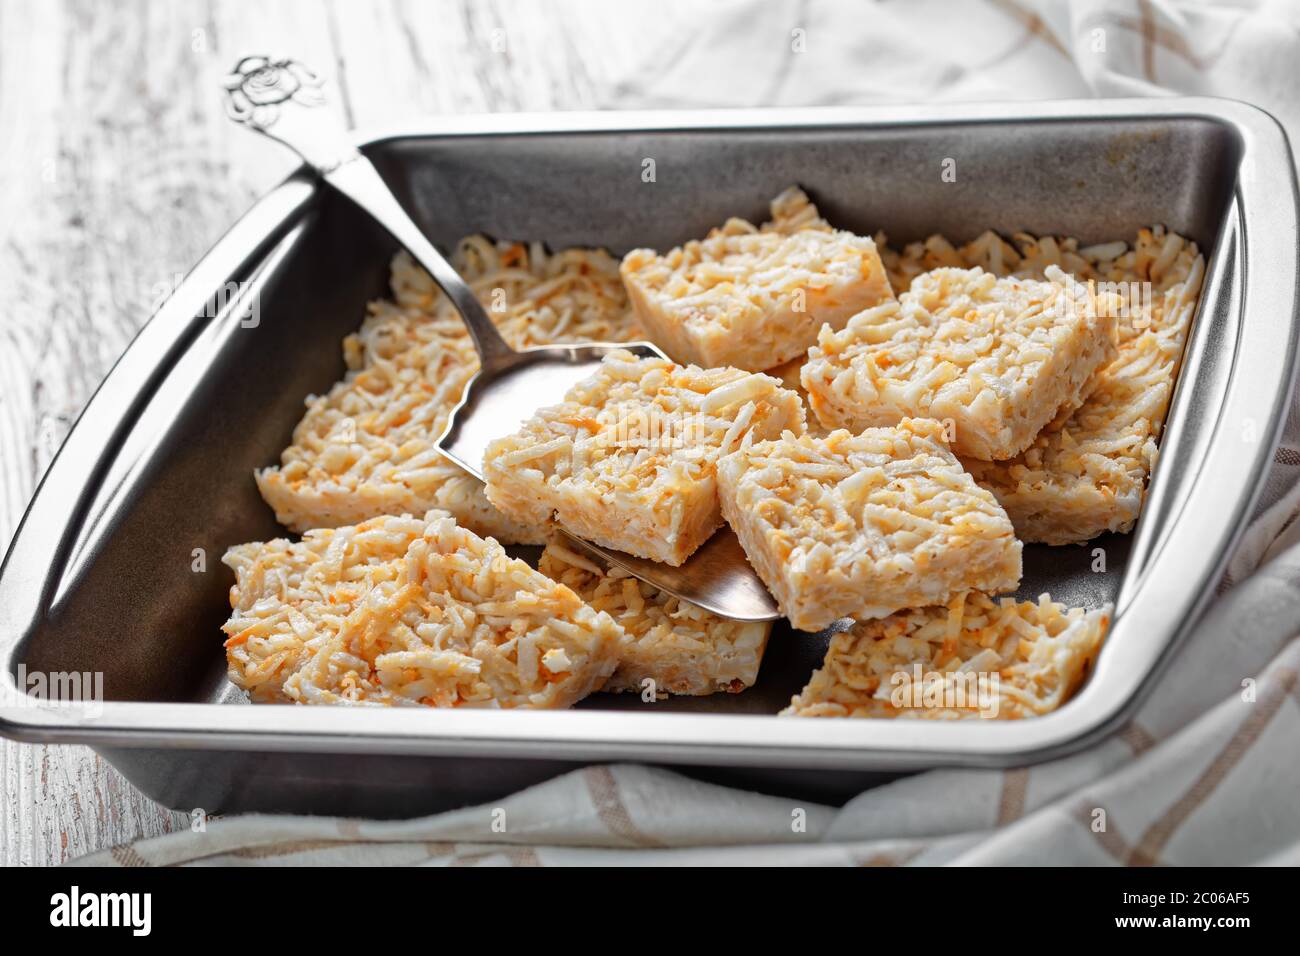 close-up of no-bake coconut crack bars in a baking dish and one on a cake shovel on a rustic wooden table Stock Photo